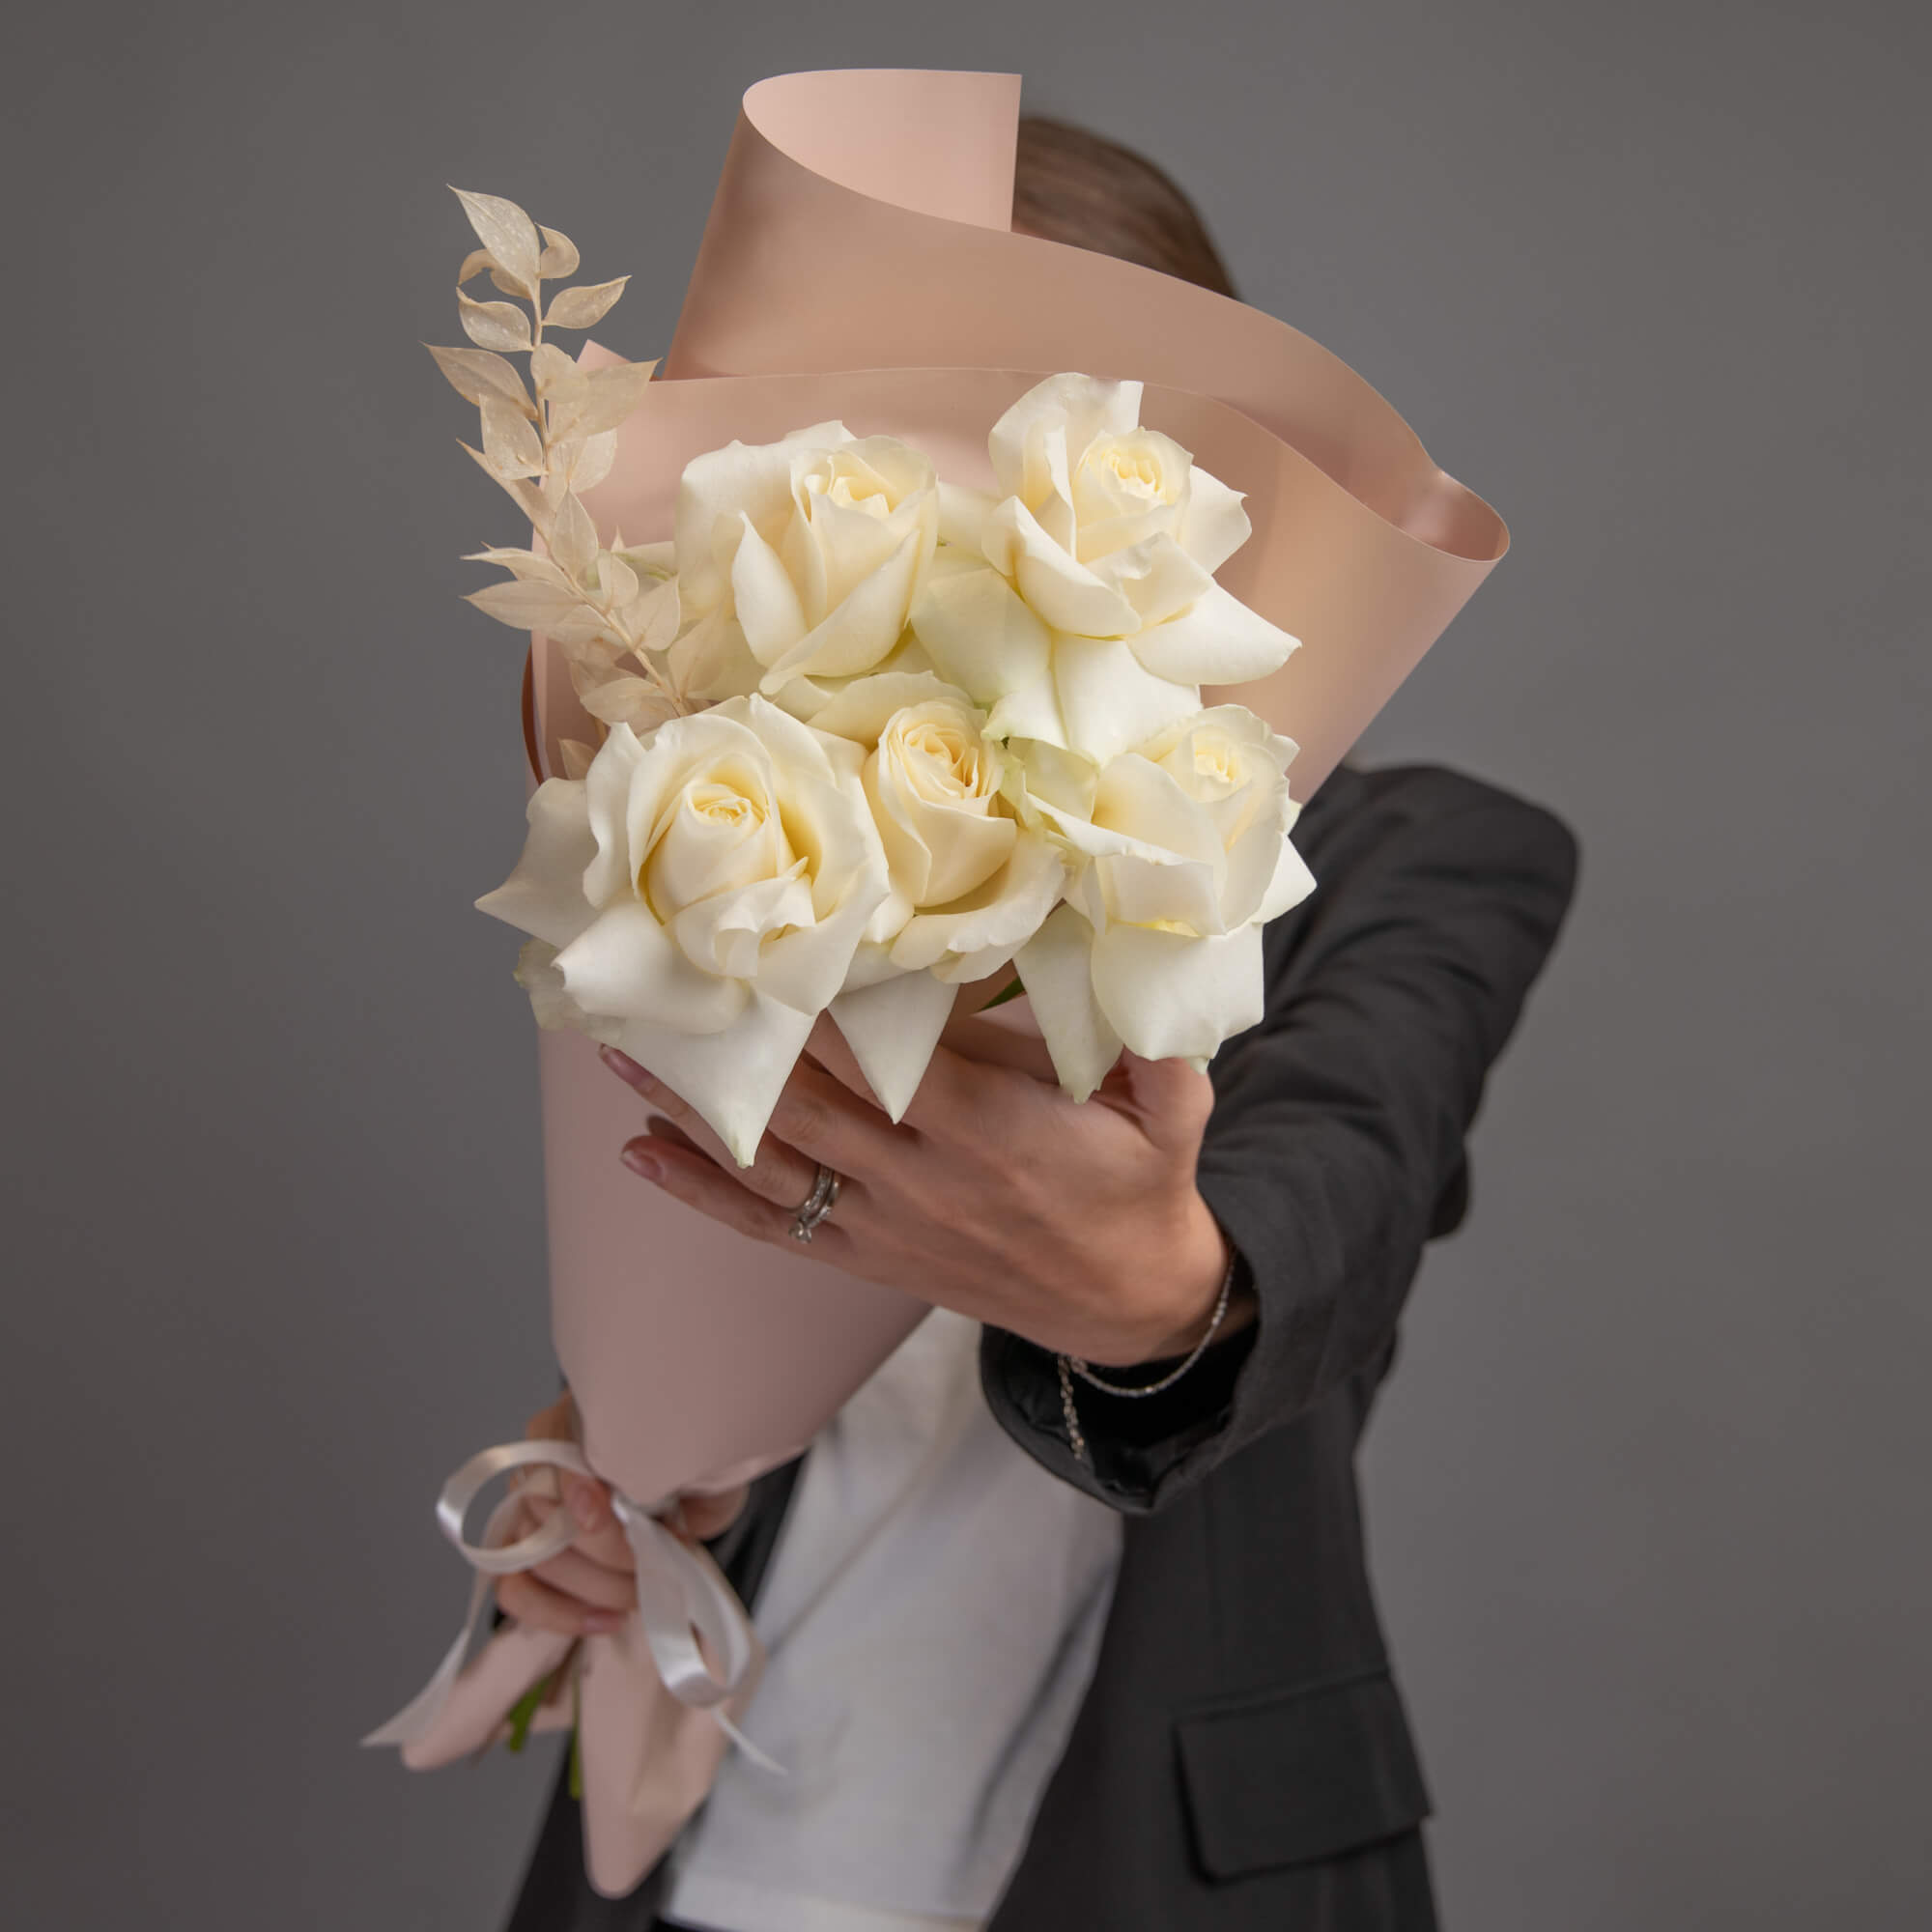 Bouquet of 5 white roses